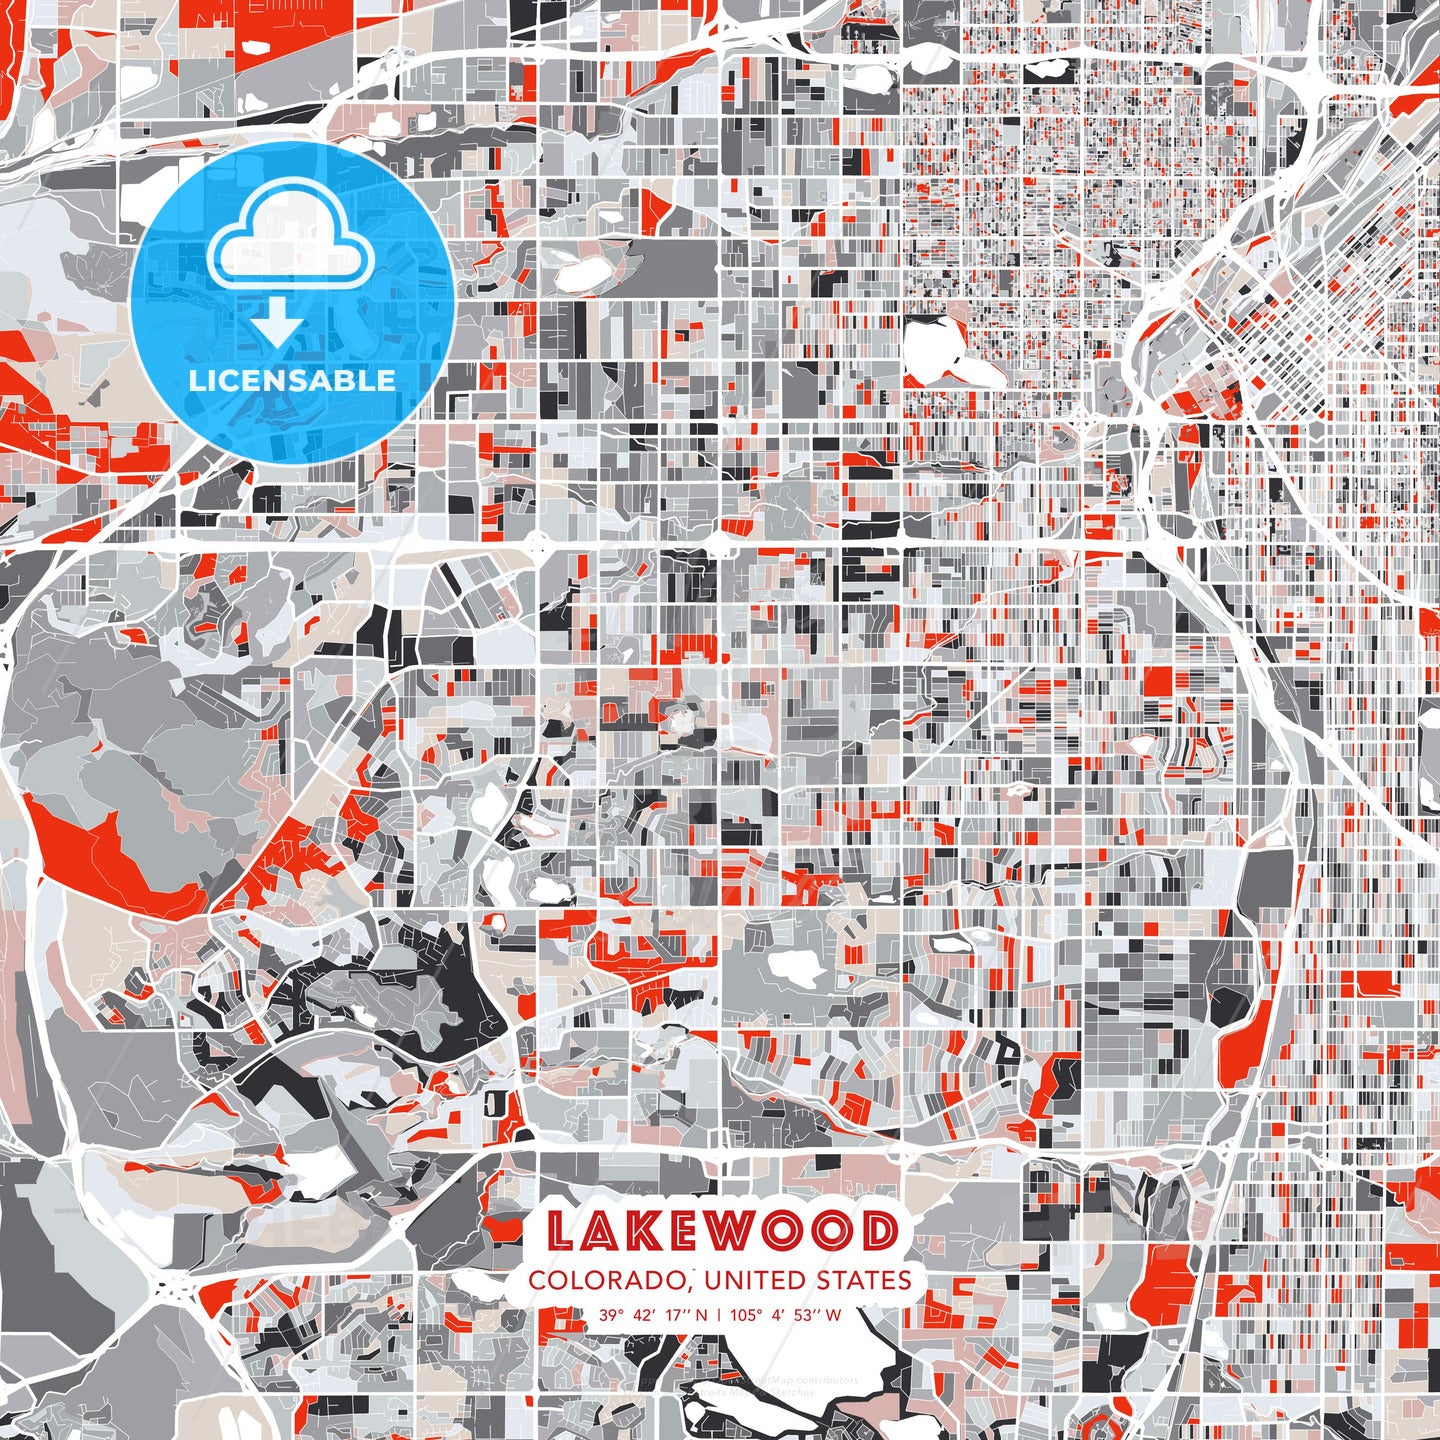 Lakewood, Colorado, United States, modern map - HEBSTREITS Sketches